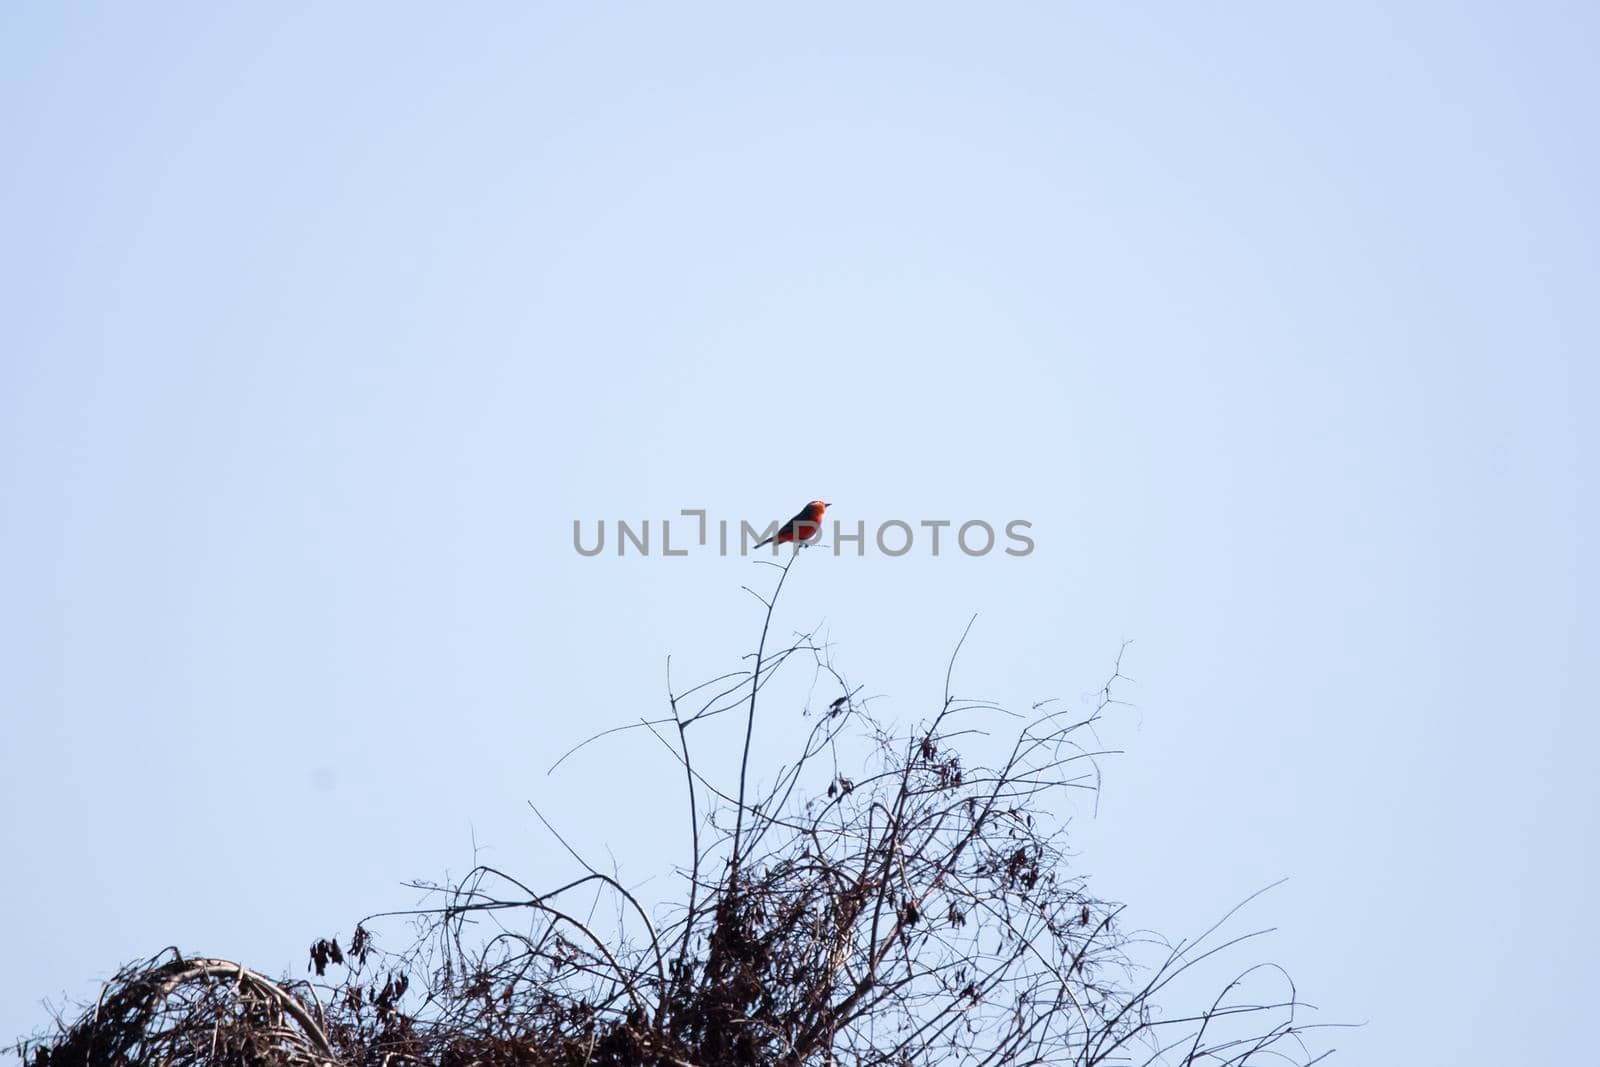 Curious vermillion flycatcher (Pyrocephalus obscurus) looking around from its perch